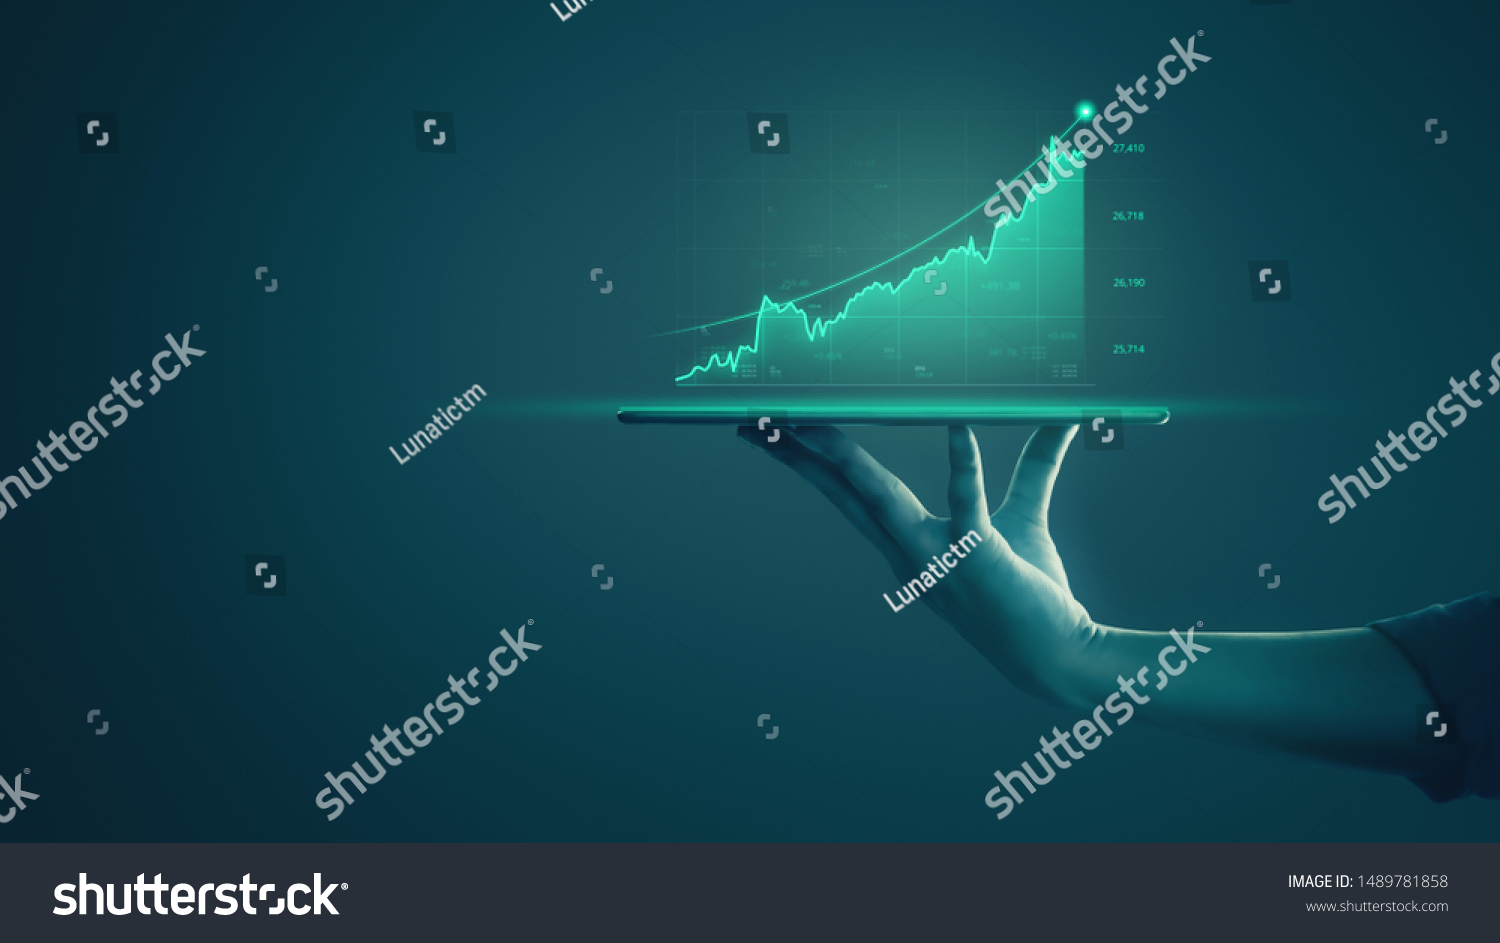 Business man holding tablet and showing holographic graphs and stock market statistics gain profits. Concept of growth planning and business strategy. Display of good economy form digital screen. #1489781858